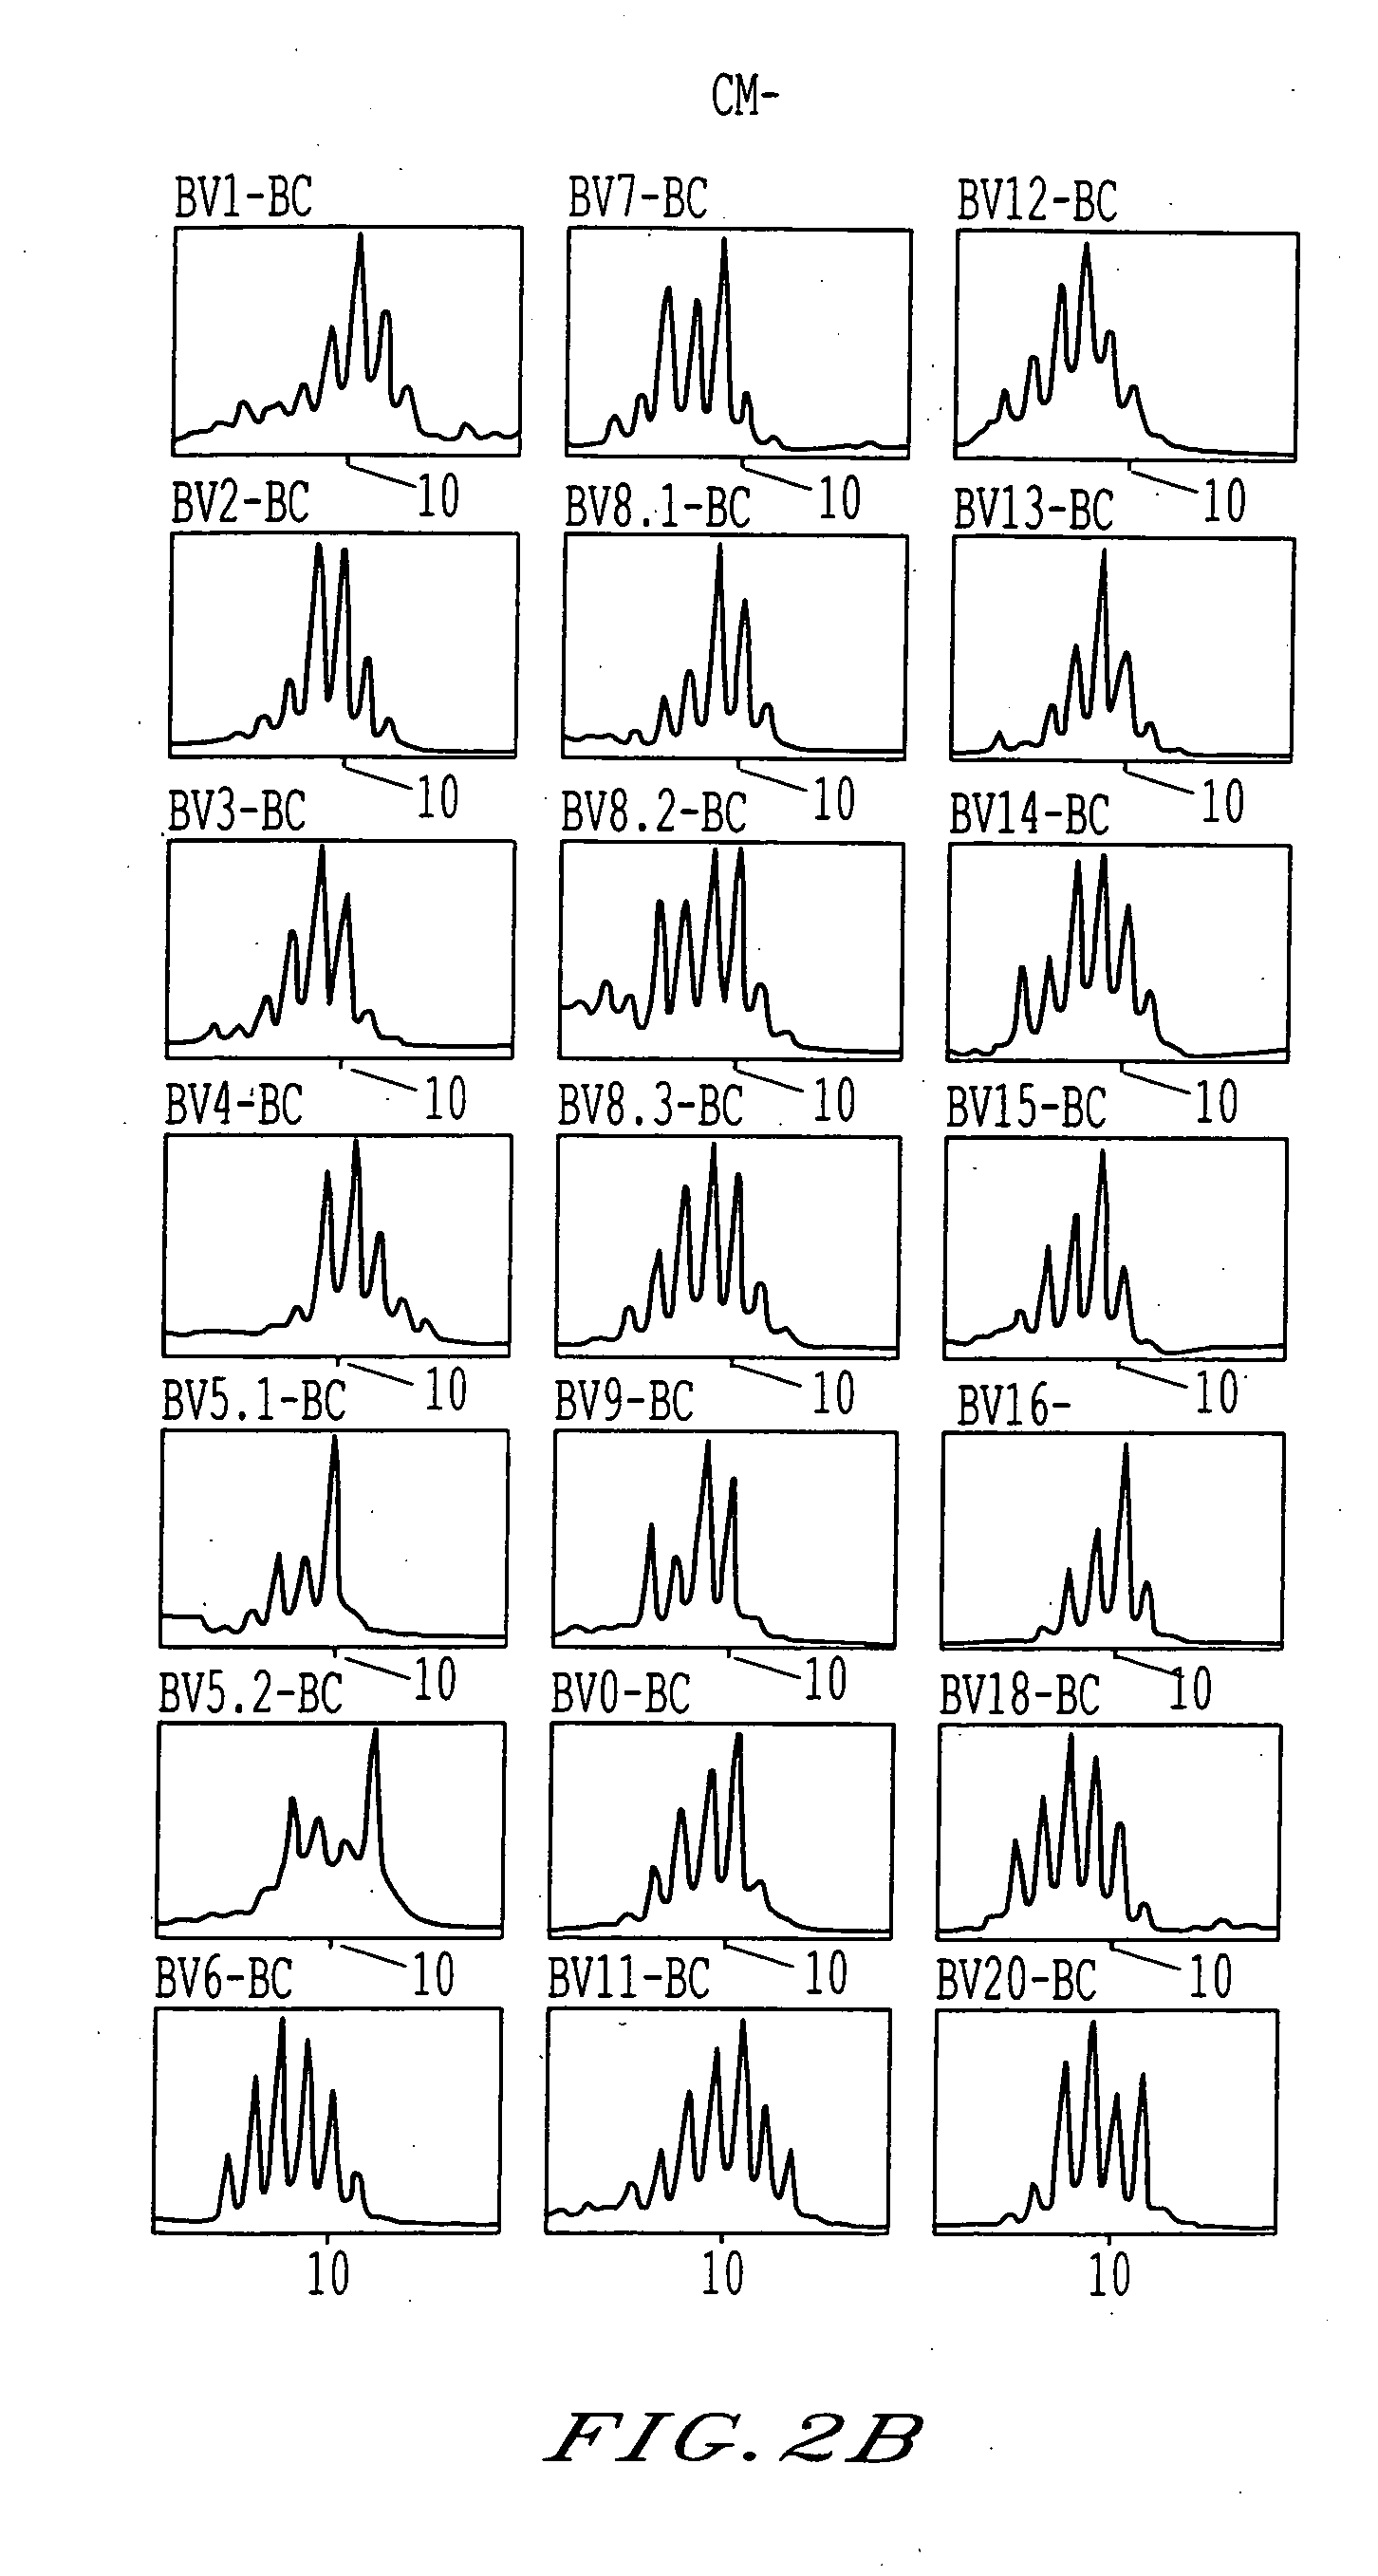 System, method, and computer program product for extraction, gathering, manipulation, and analysis of peak data from an automated sequencer